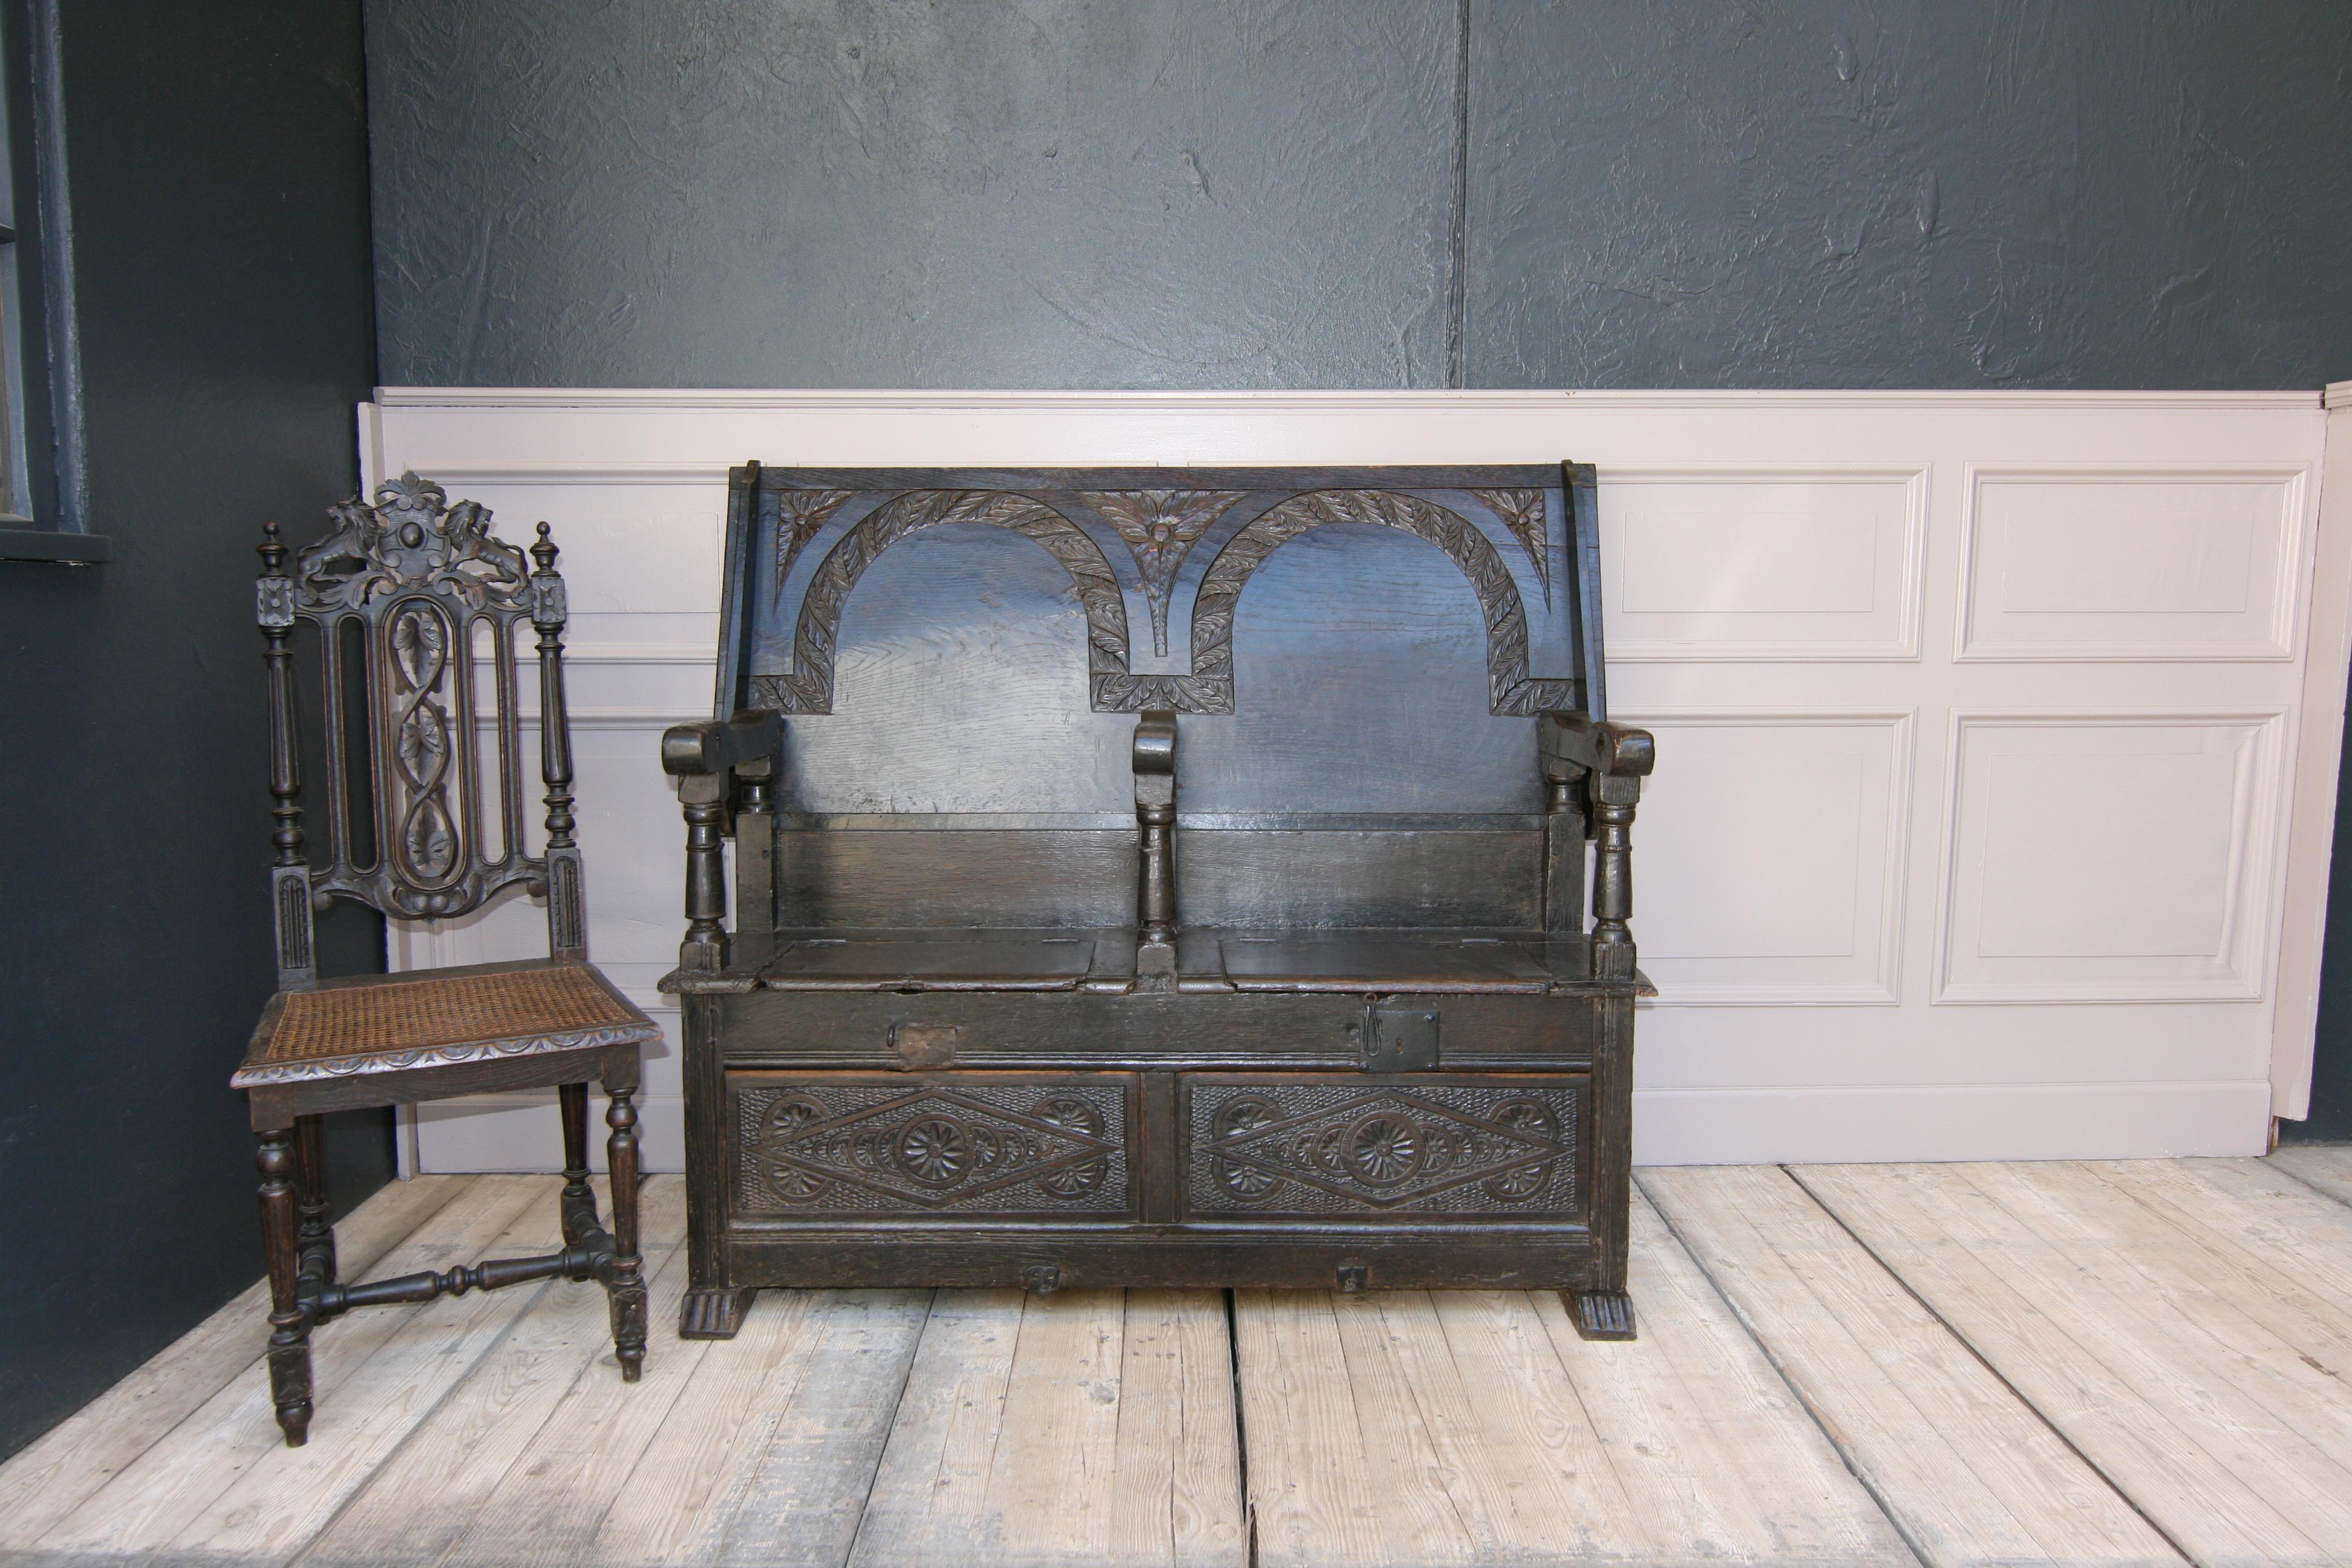 Rare combination furniture from the 17th century, made of solid oak. Probably from a Flemish monastery.
Chest bench with 2 seats separated by 1 (of 3) armrests. Carved panels on the front of the bench and also carving on the backrest.
The backrest